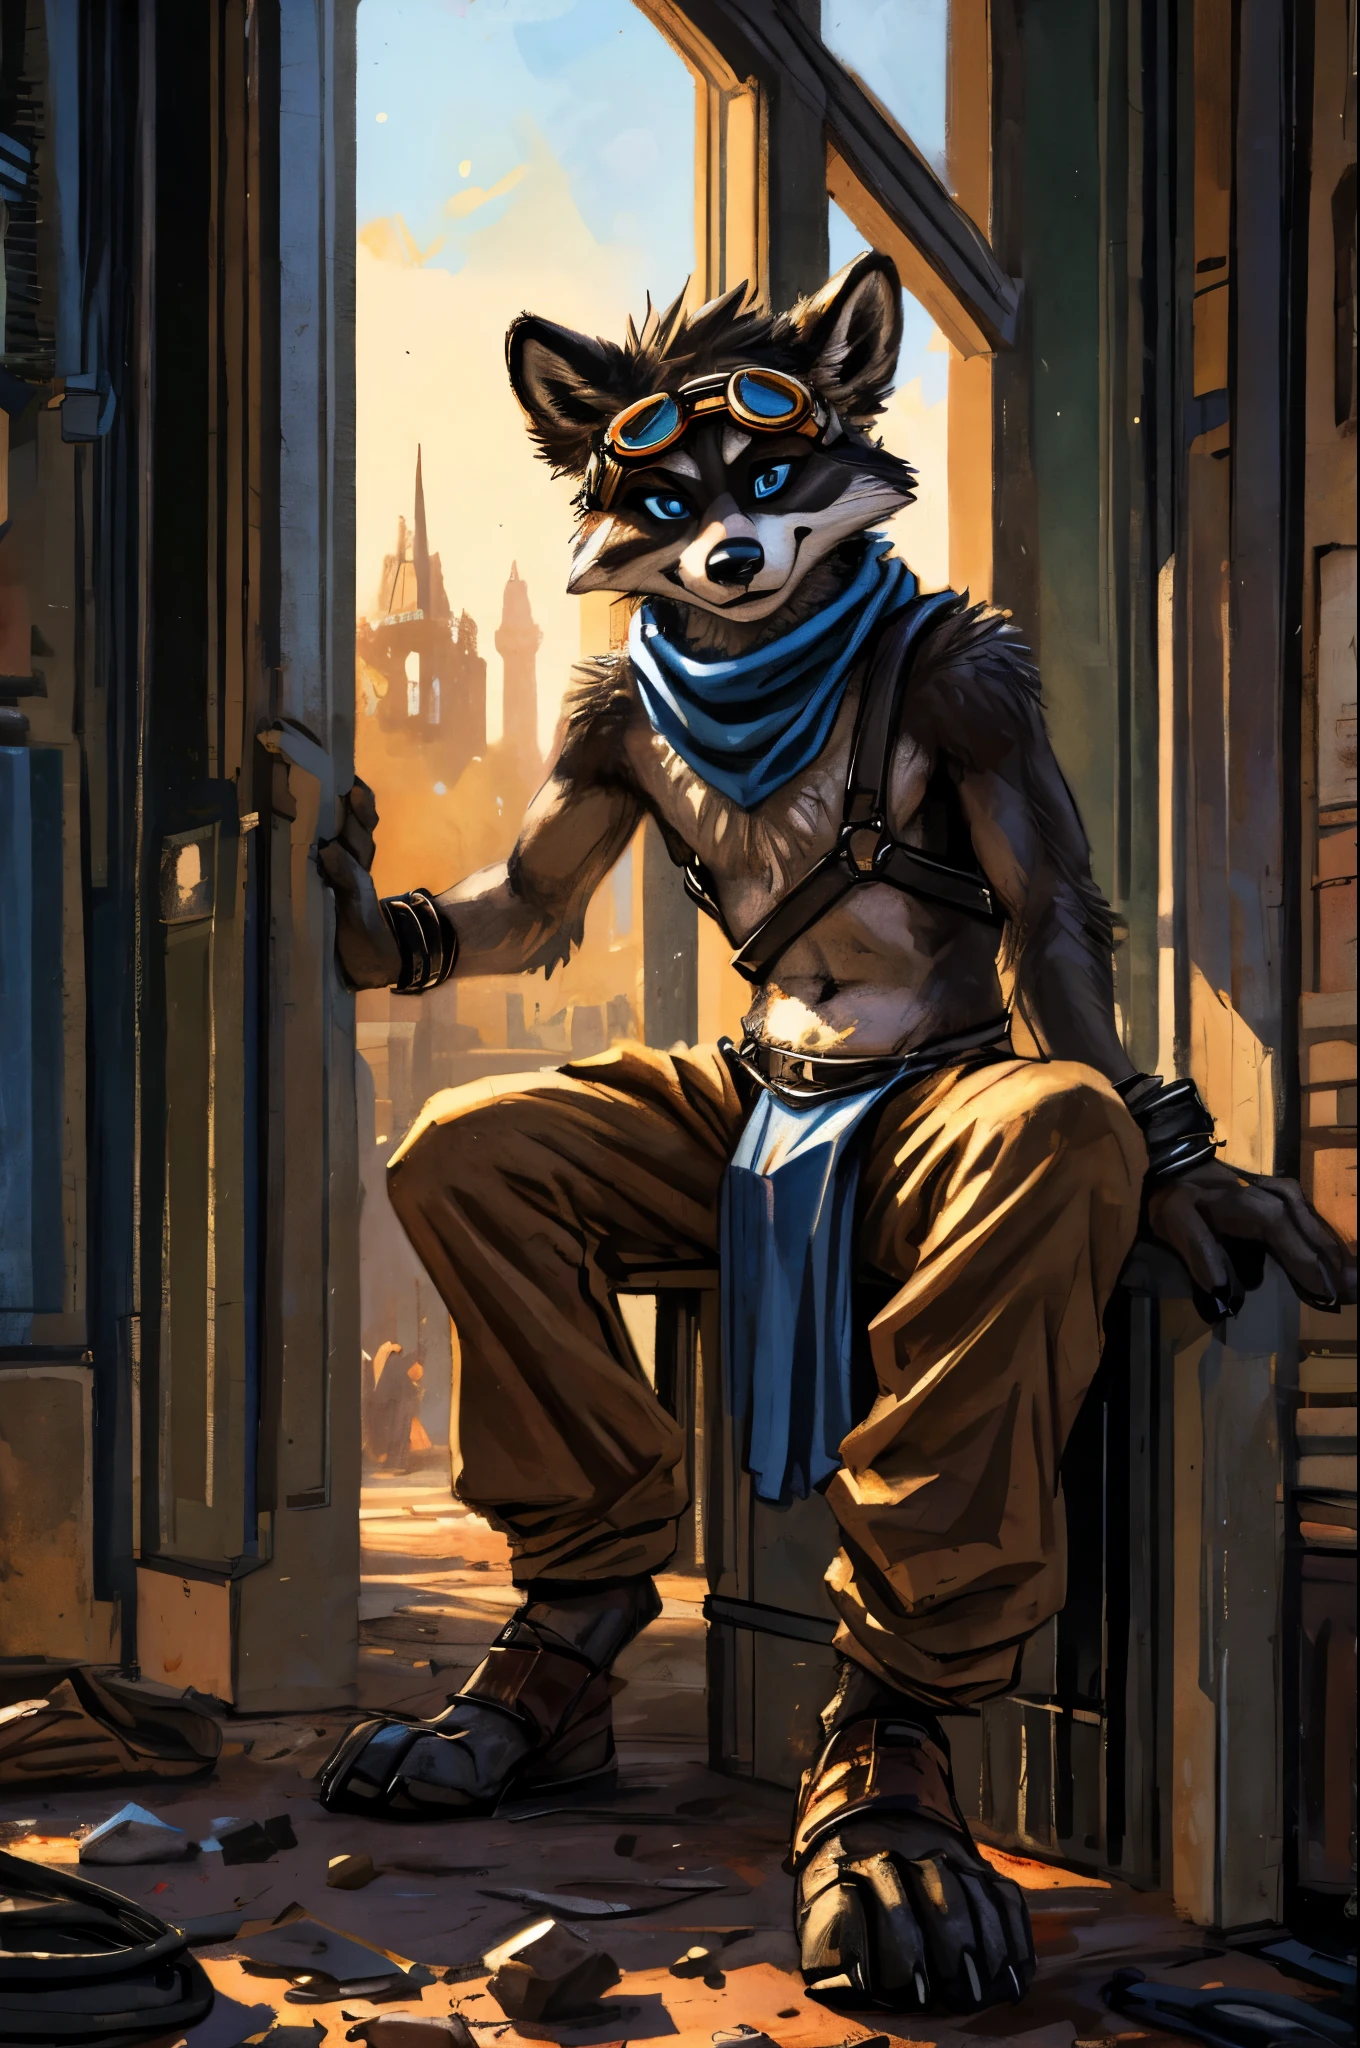 no lighting, deep shadow, dynamic angle, Solo, teen furry, furry, teen, raccoon, grey body, long brown spiked_ponytail, Detailed body fur, long blue scarf, leather_harness, blue_loincloth, goggles, masterpiece, gray body, Detailed face, big eyebrows, blue eyes, detailed eyes, No muscles, Detailed hands, Flat body, Skinny, Detailed paws, metal cuffs on wrists, metal cuffs on ankles, black baggy pants, no shirt, crowded nightclub, no underwear, sitting, art by kenket